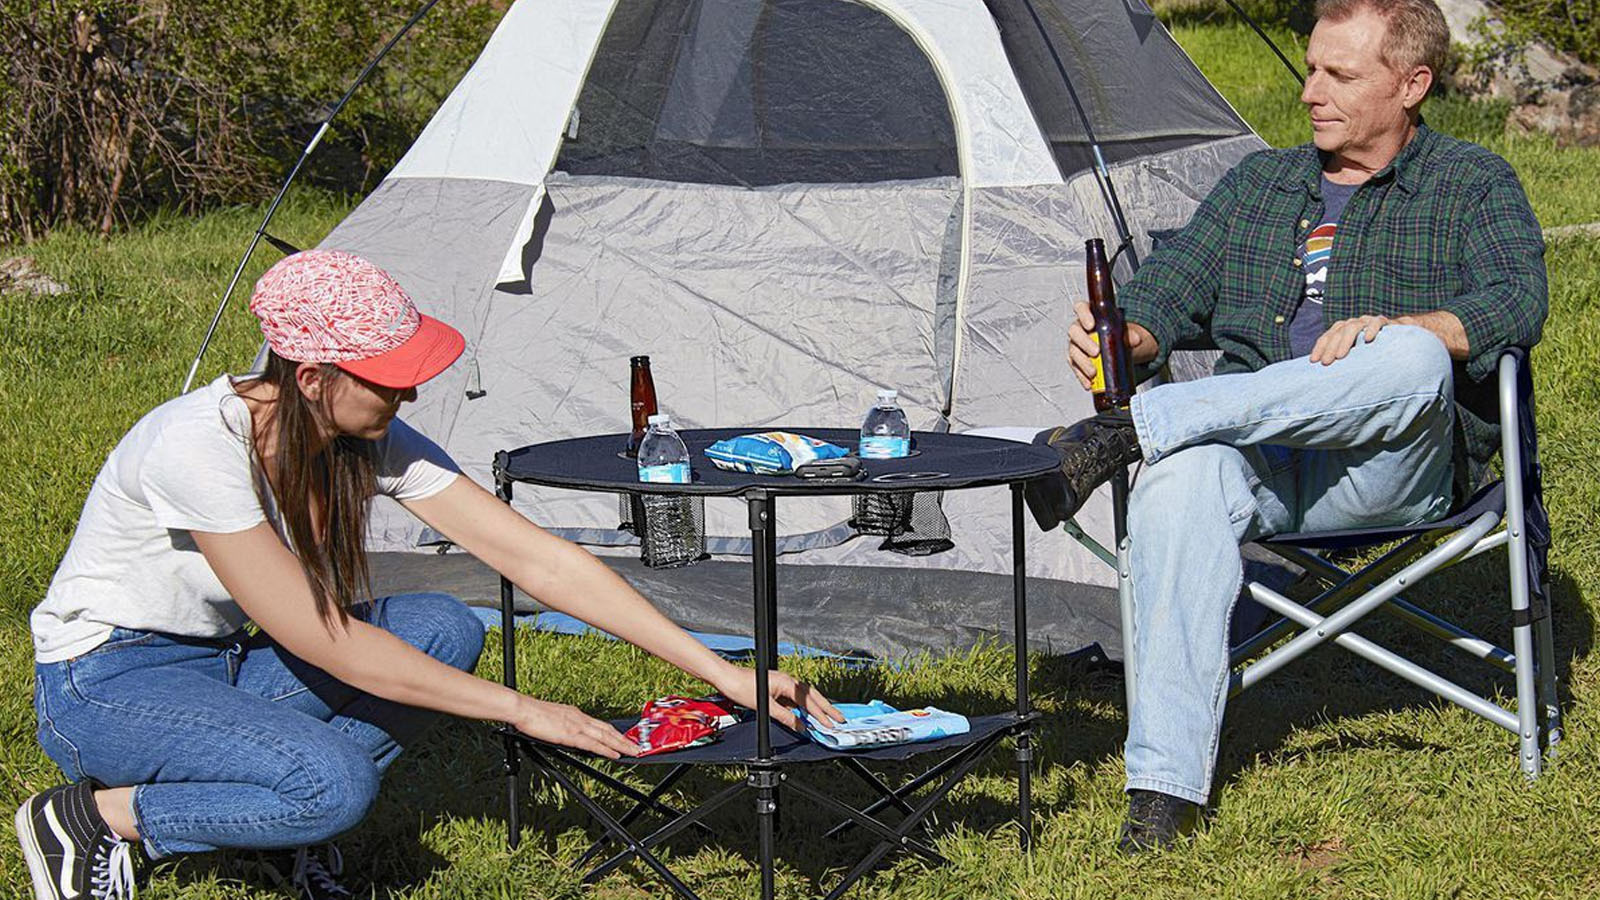 https://www.slashgear.com/img/gallery/5-harbor-freight-finds-that-will-elevate-your-next-camping-trip/l-intro-1697212022.jpg